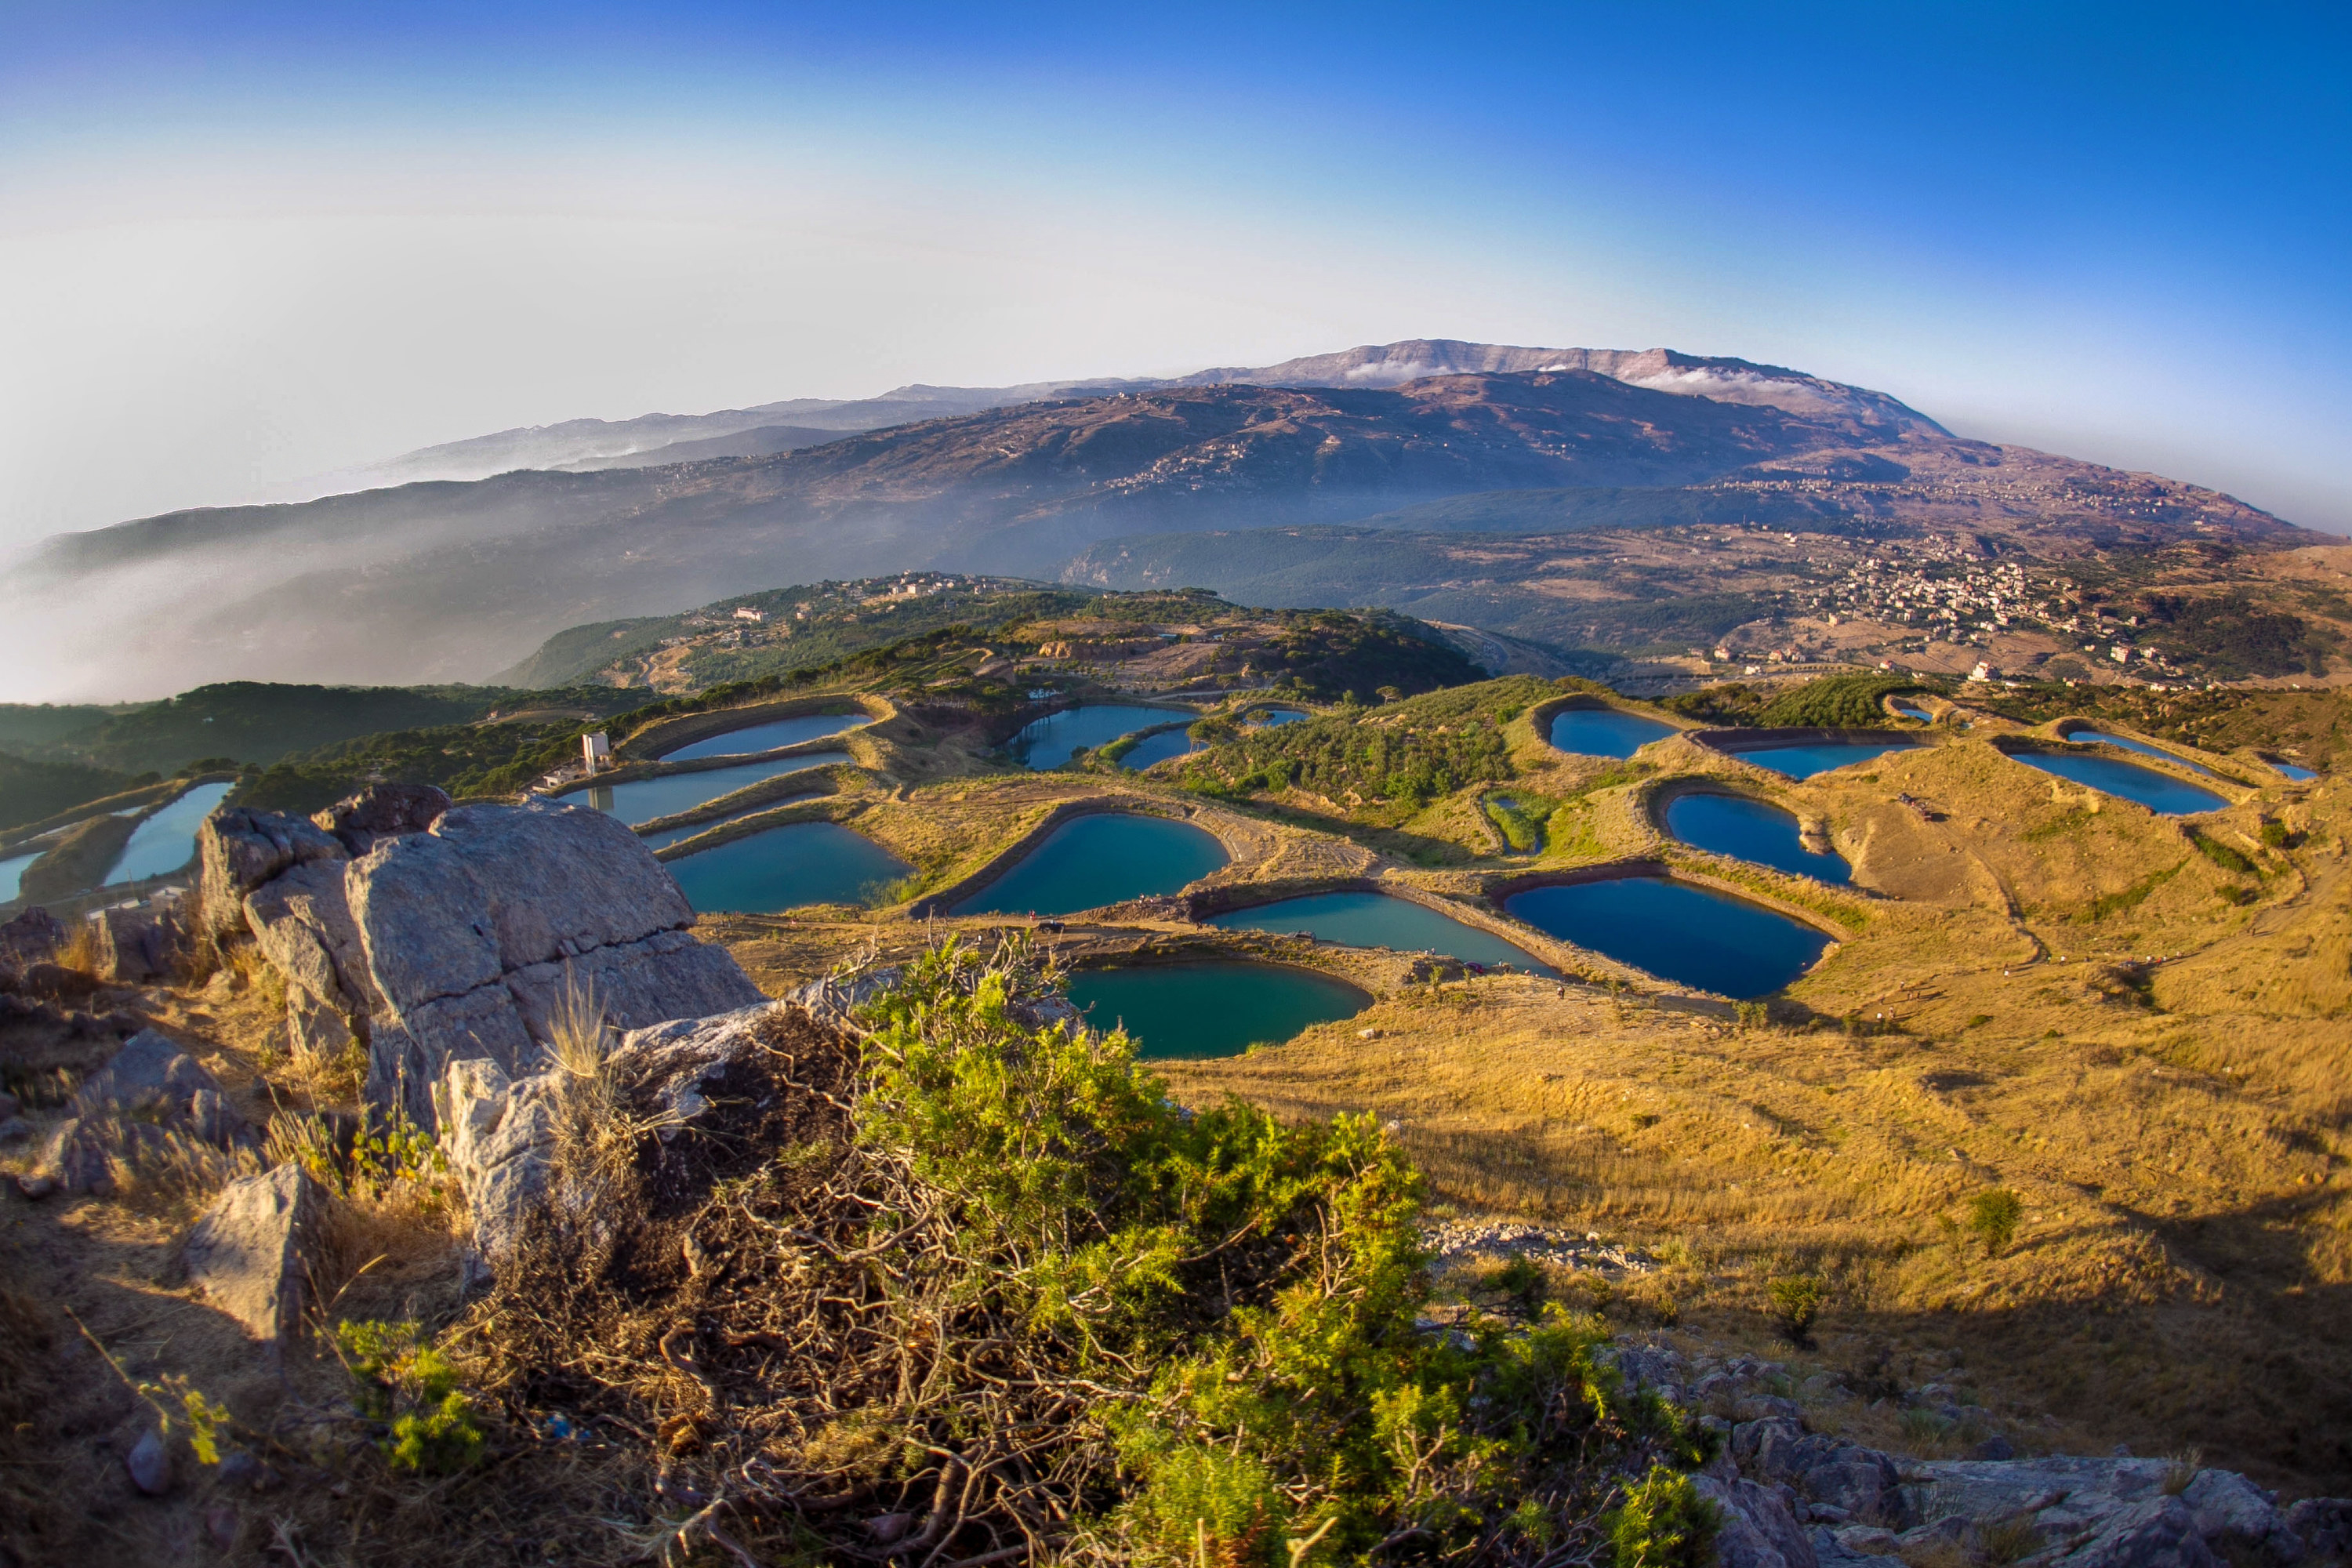 A scenic view of mountains and lakes against the sky in Lebanon.